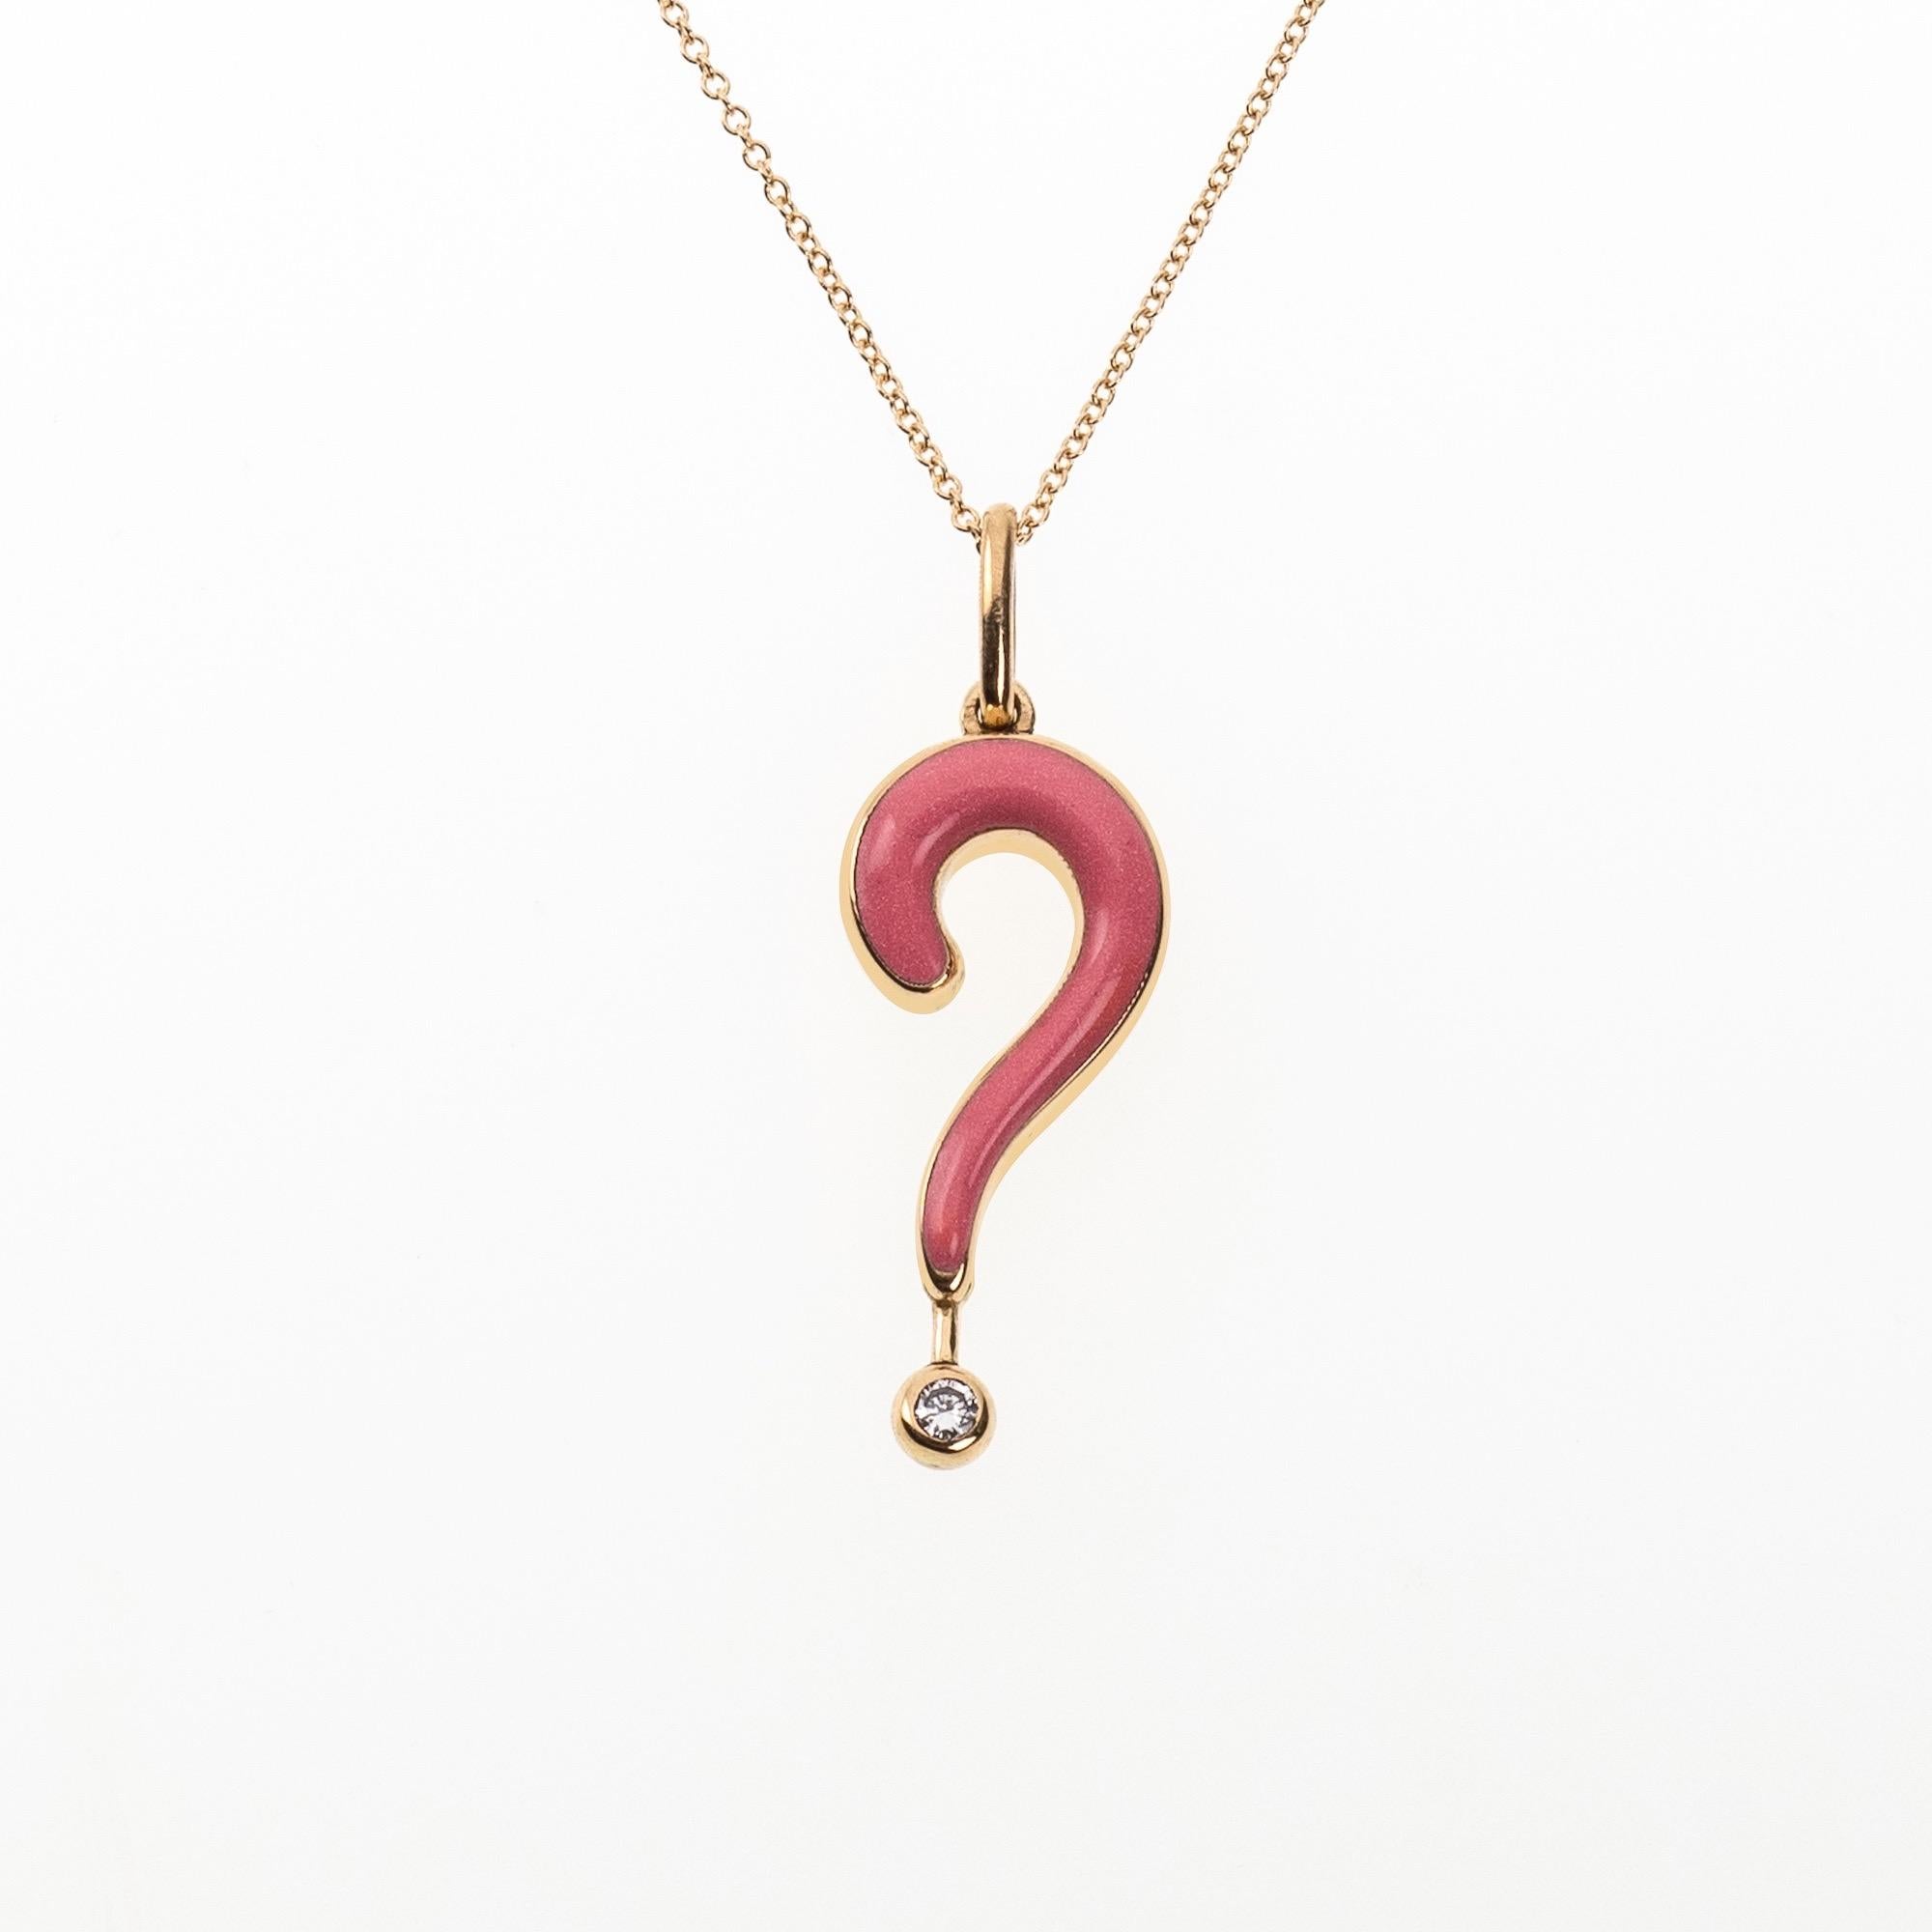 The Question mark, pendant necklace is crafted in 18K gold hallmarked in Cyprus. This striking  pendant necklace, comes in a highly polished finish and features enamel and a 0.06 Cts White Diamond. The pendant can be purchased separately or with a